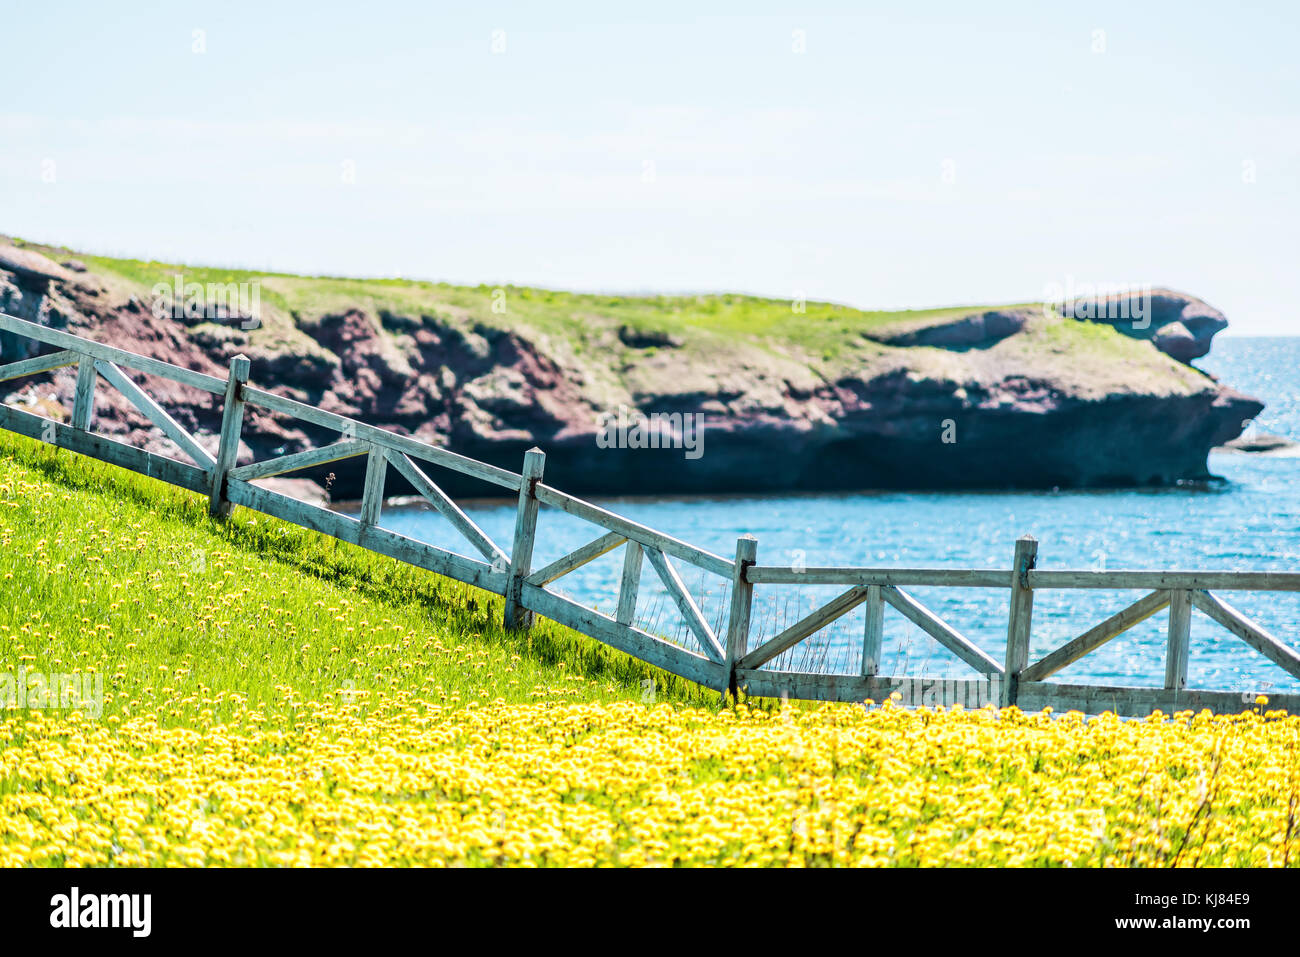 Wooden fence on edge of cliff and yellow dandelion flowers in idyllic countryside summer scenery Stock Photo